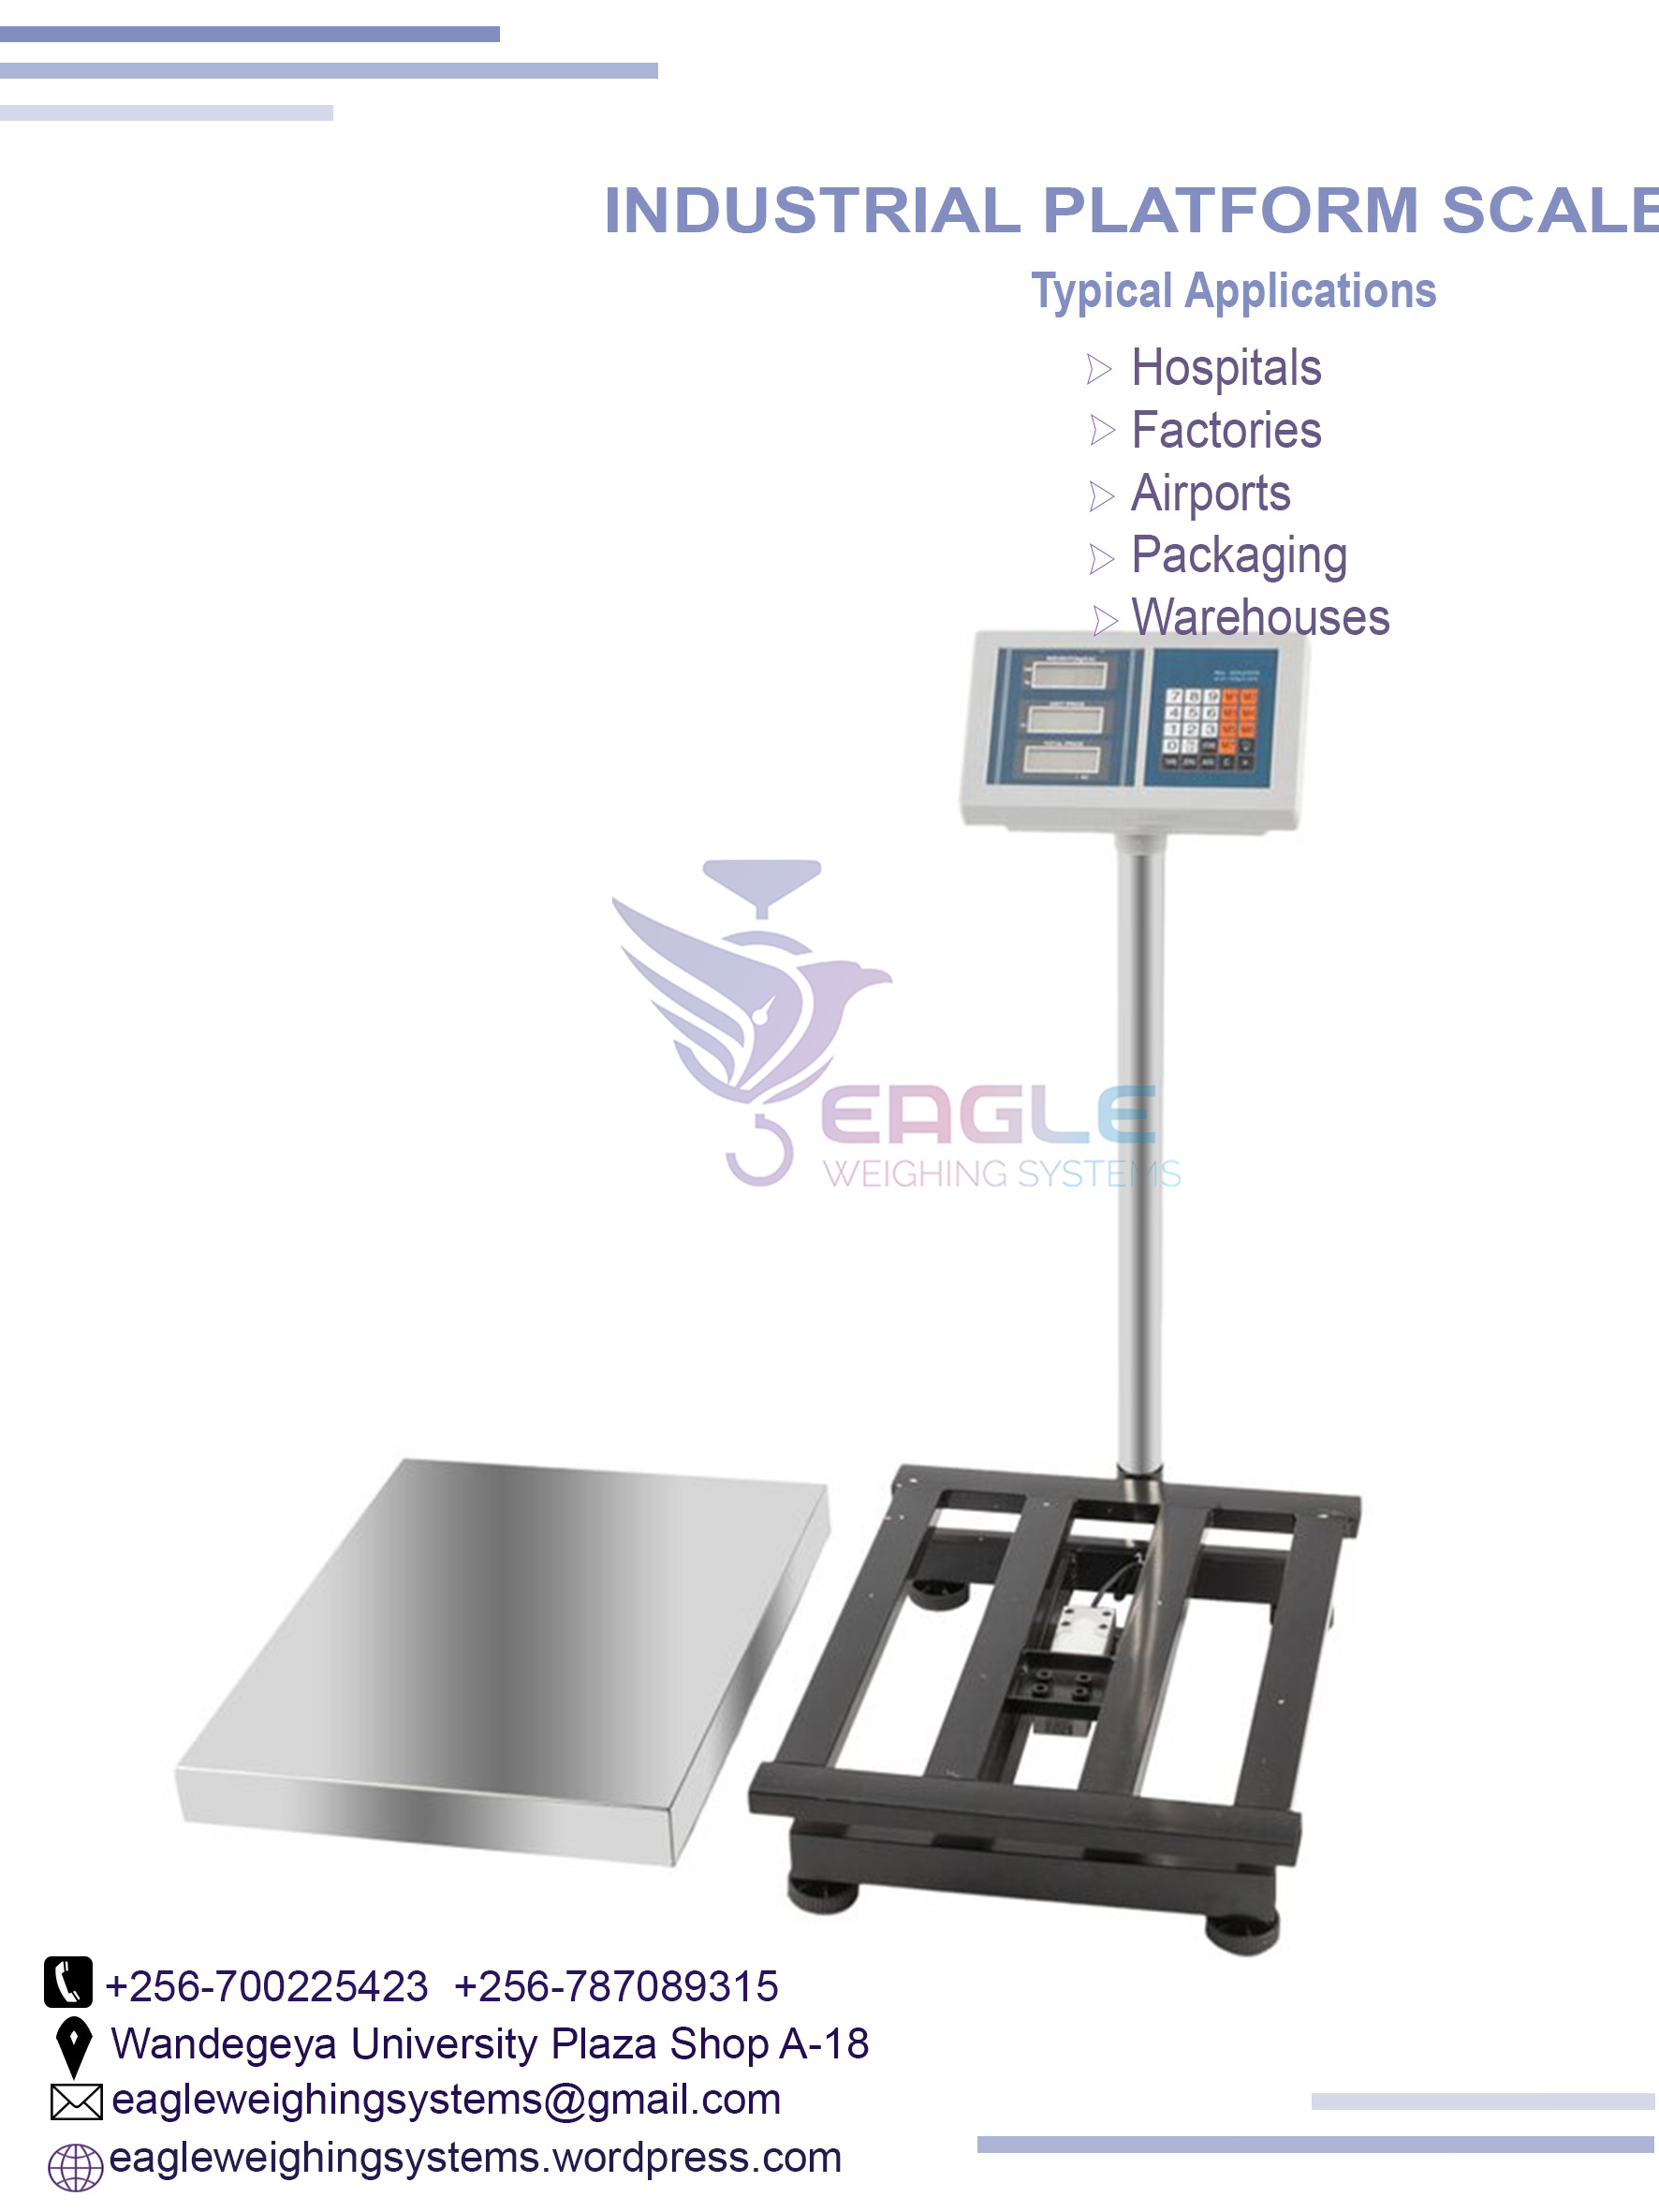 Precision Industrial Weighing Portable Scale, Kampala Central Division, Central, Uganda